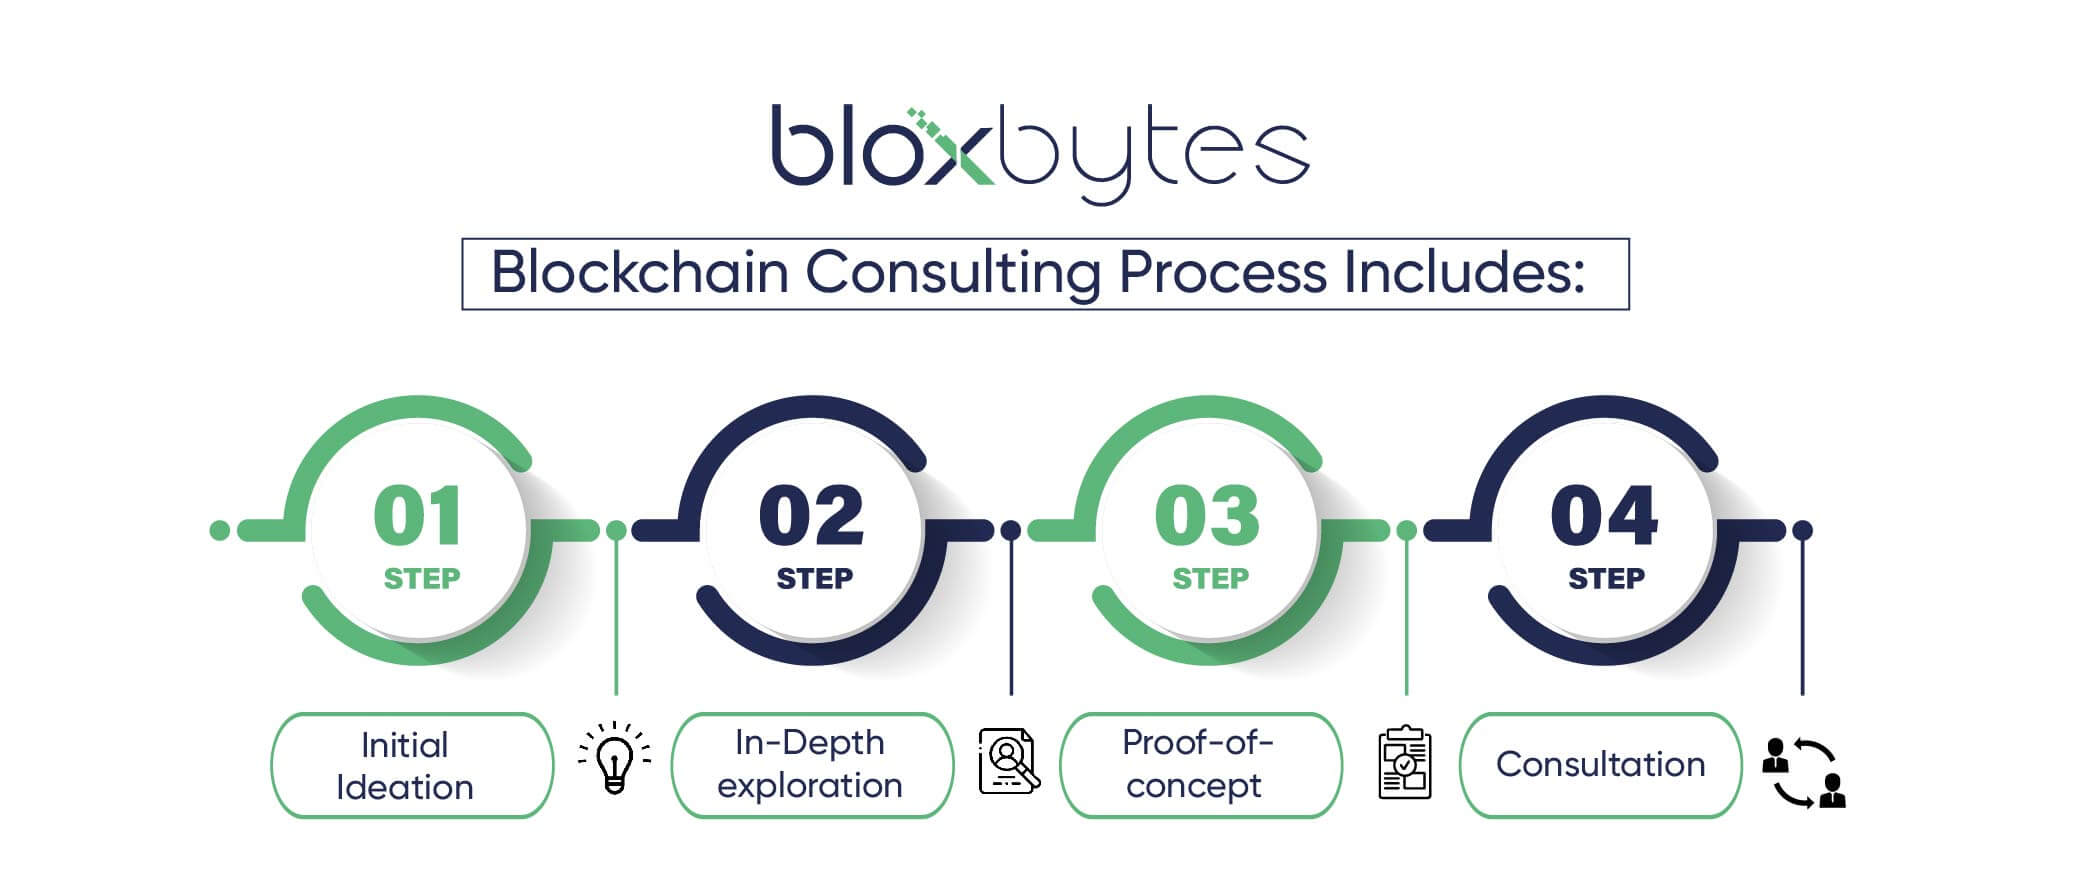 BLOCKCHAIN CONSULTING SERVICES